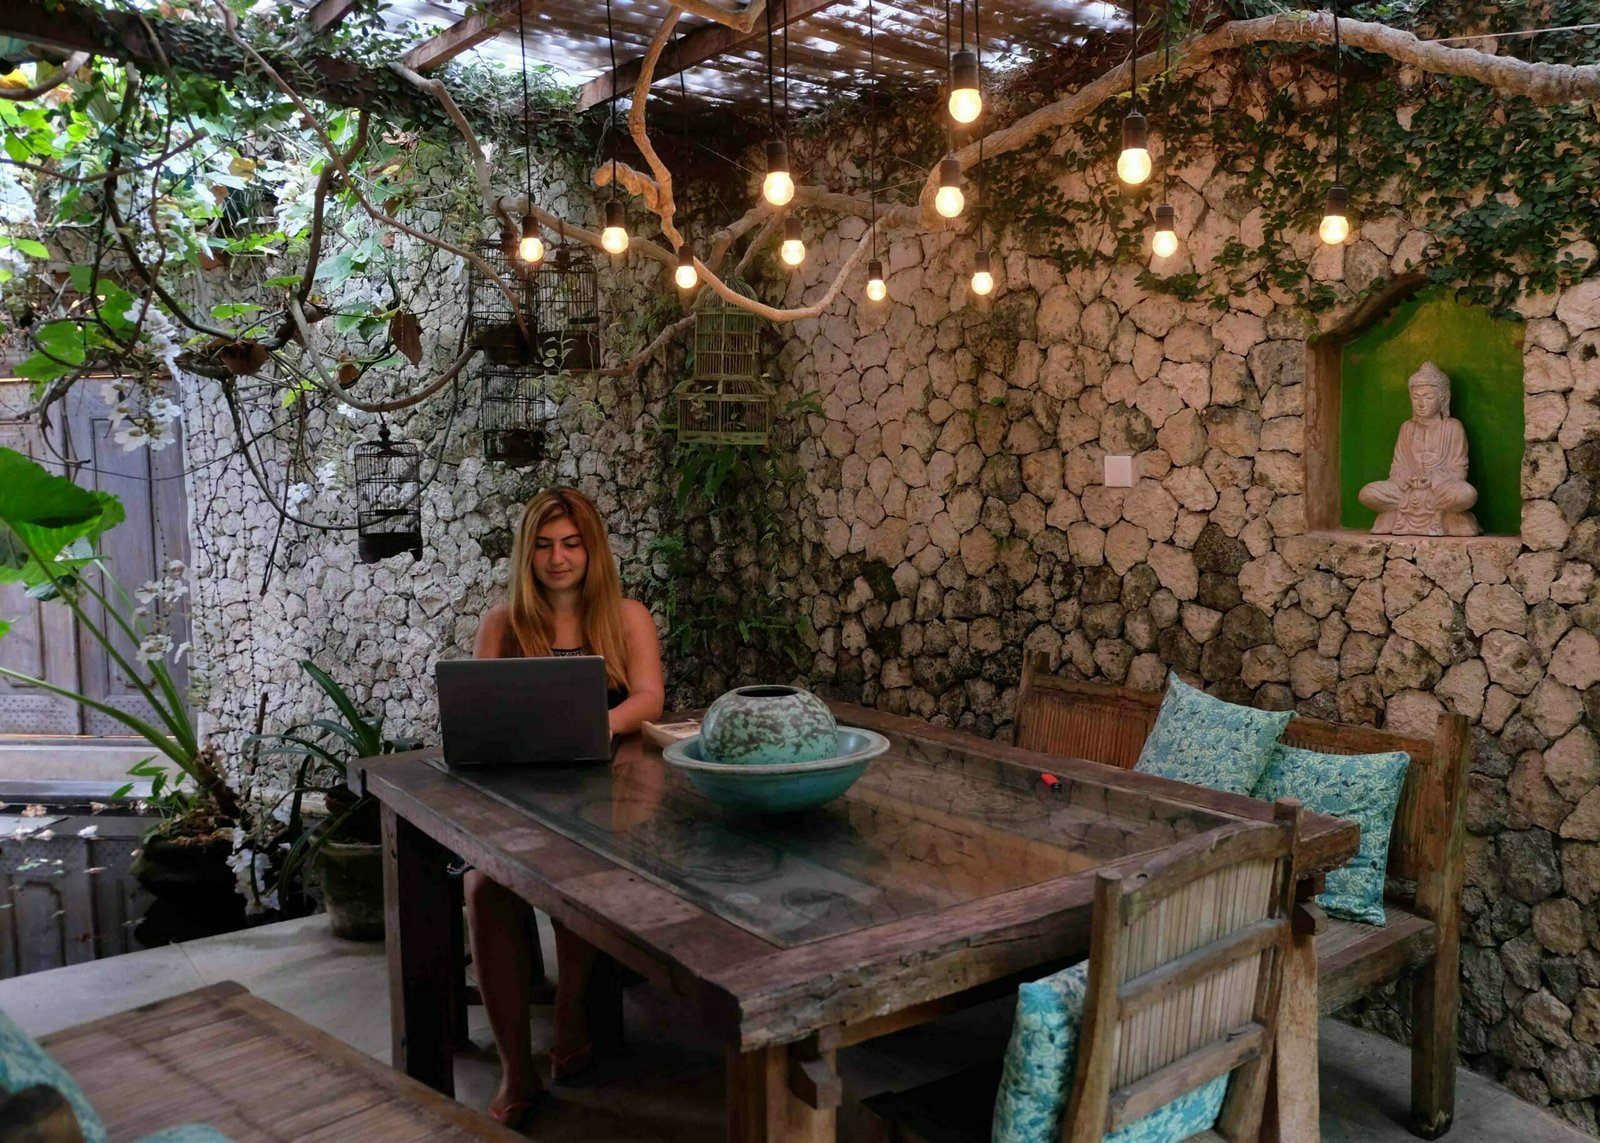 Digital Nomad Jobs: How To Find Remote Work